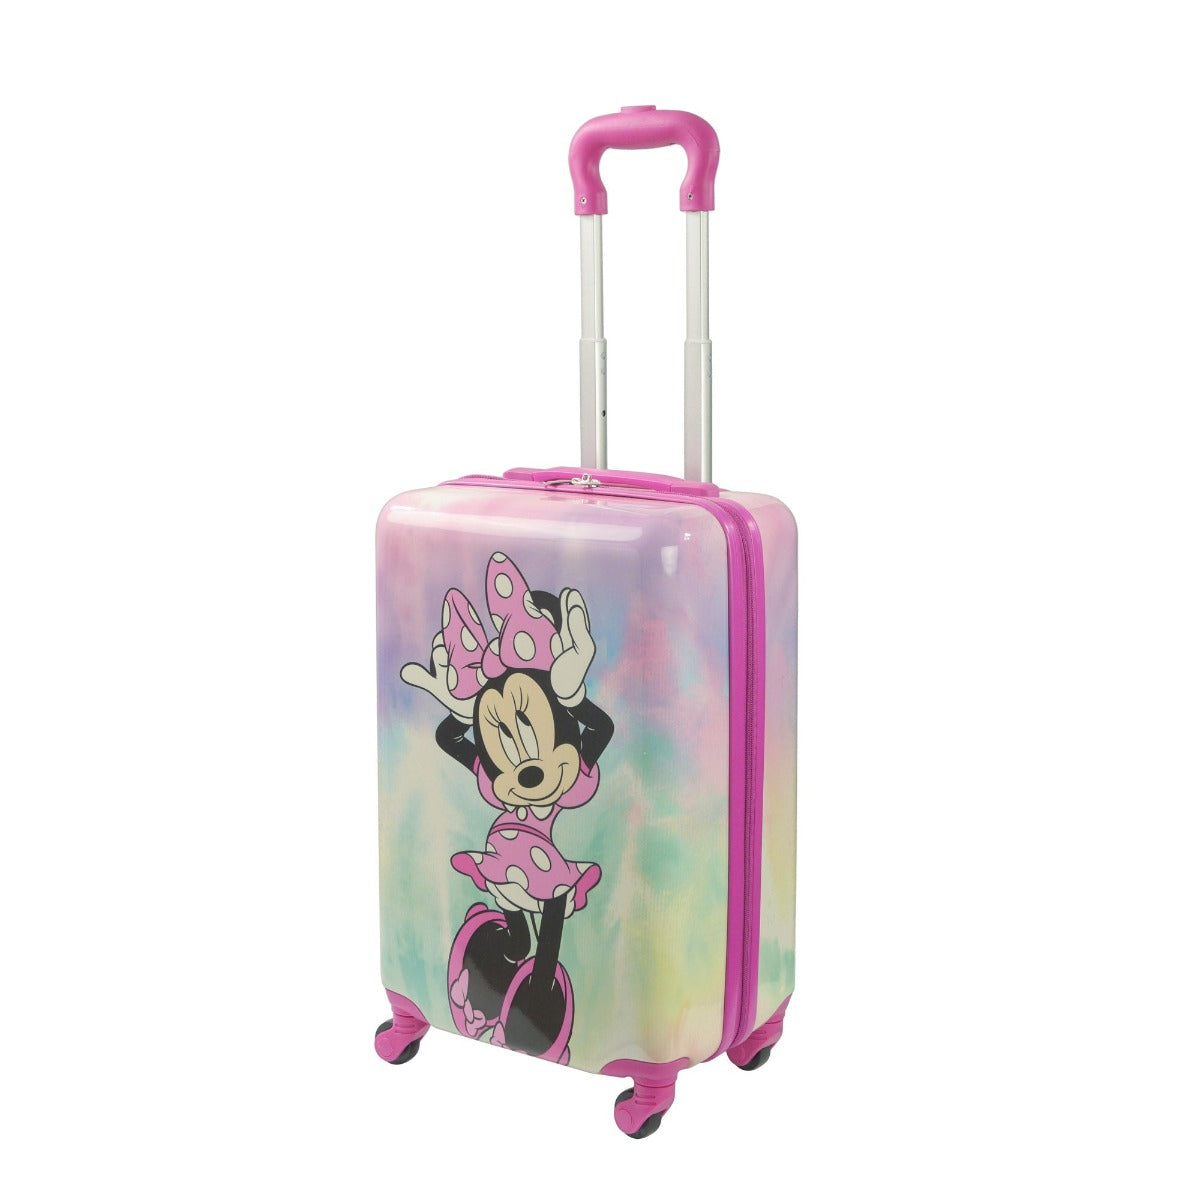 Hello Kitty x FUL 3-Piece Hardshell Luggage Set in Pink